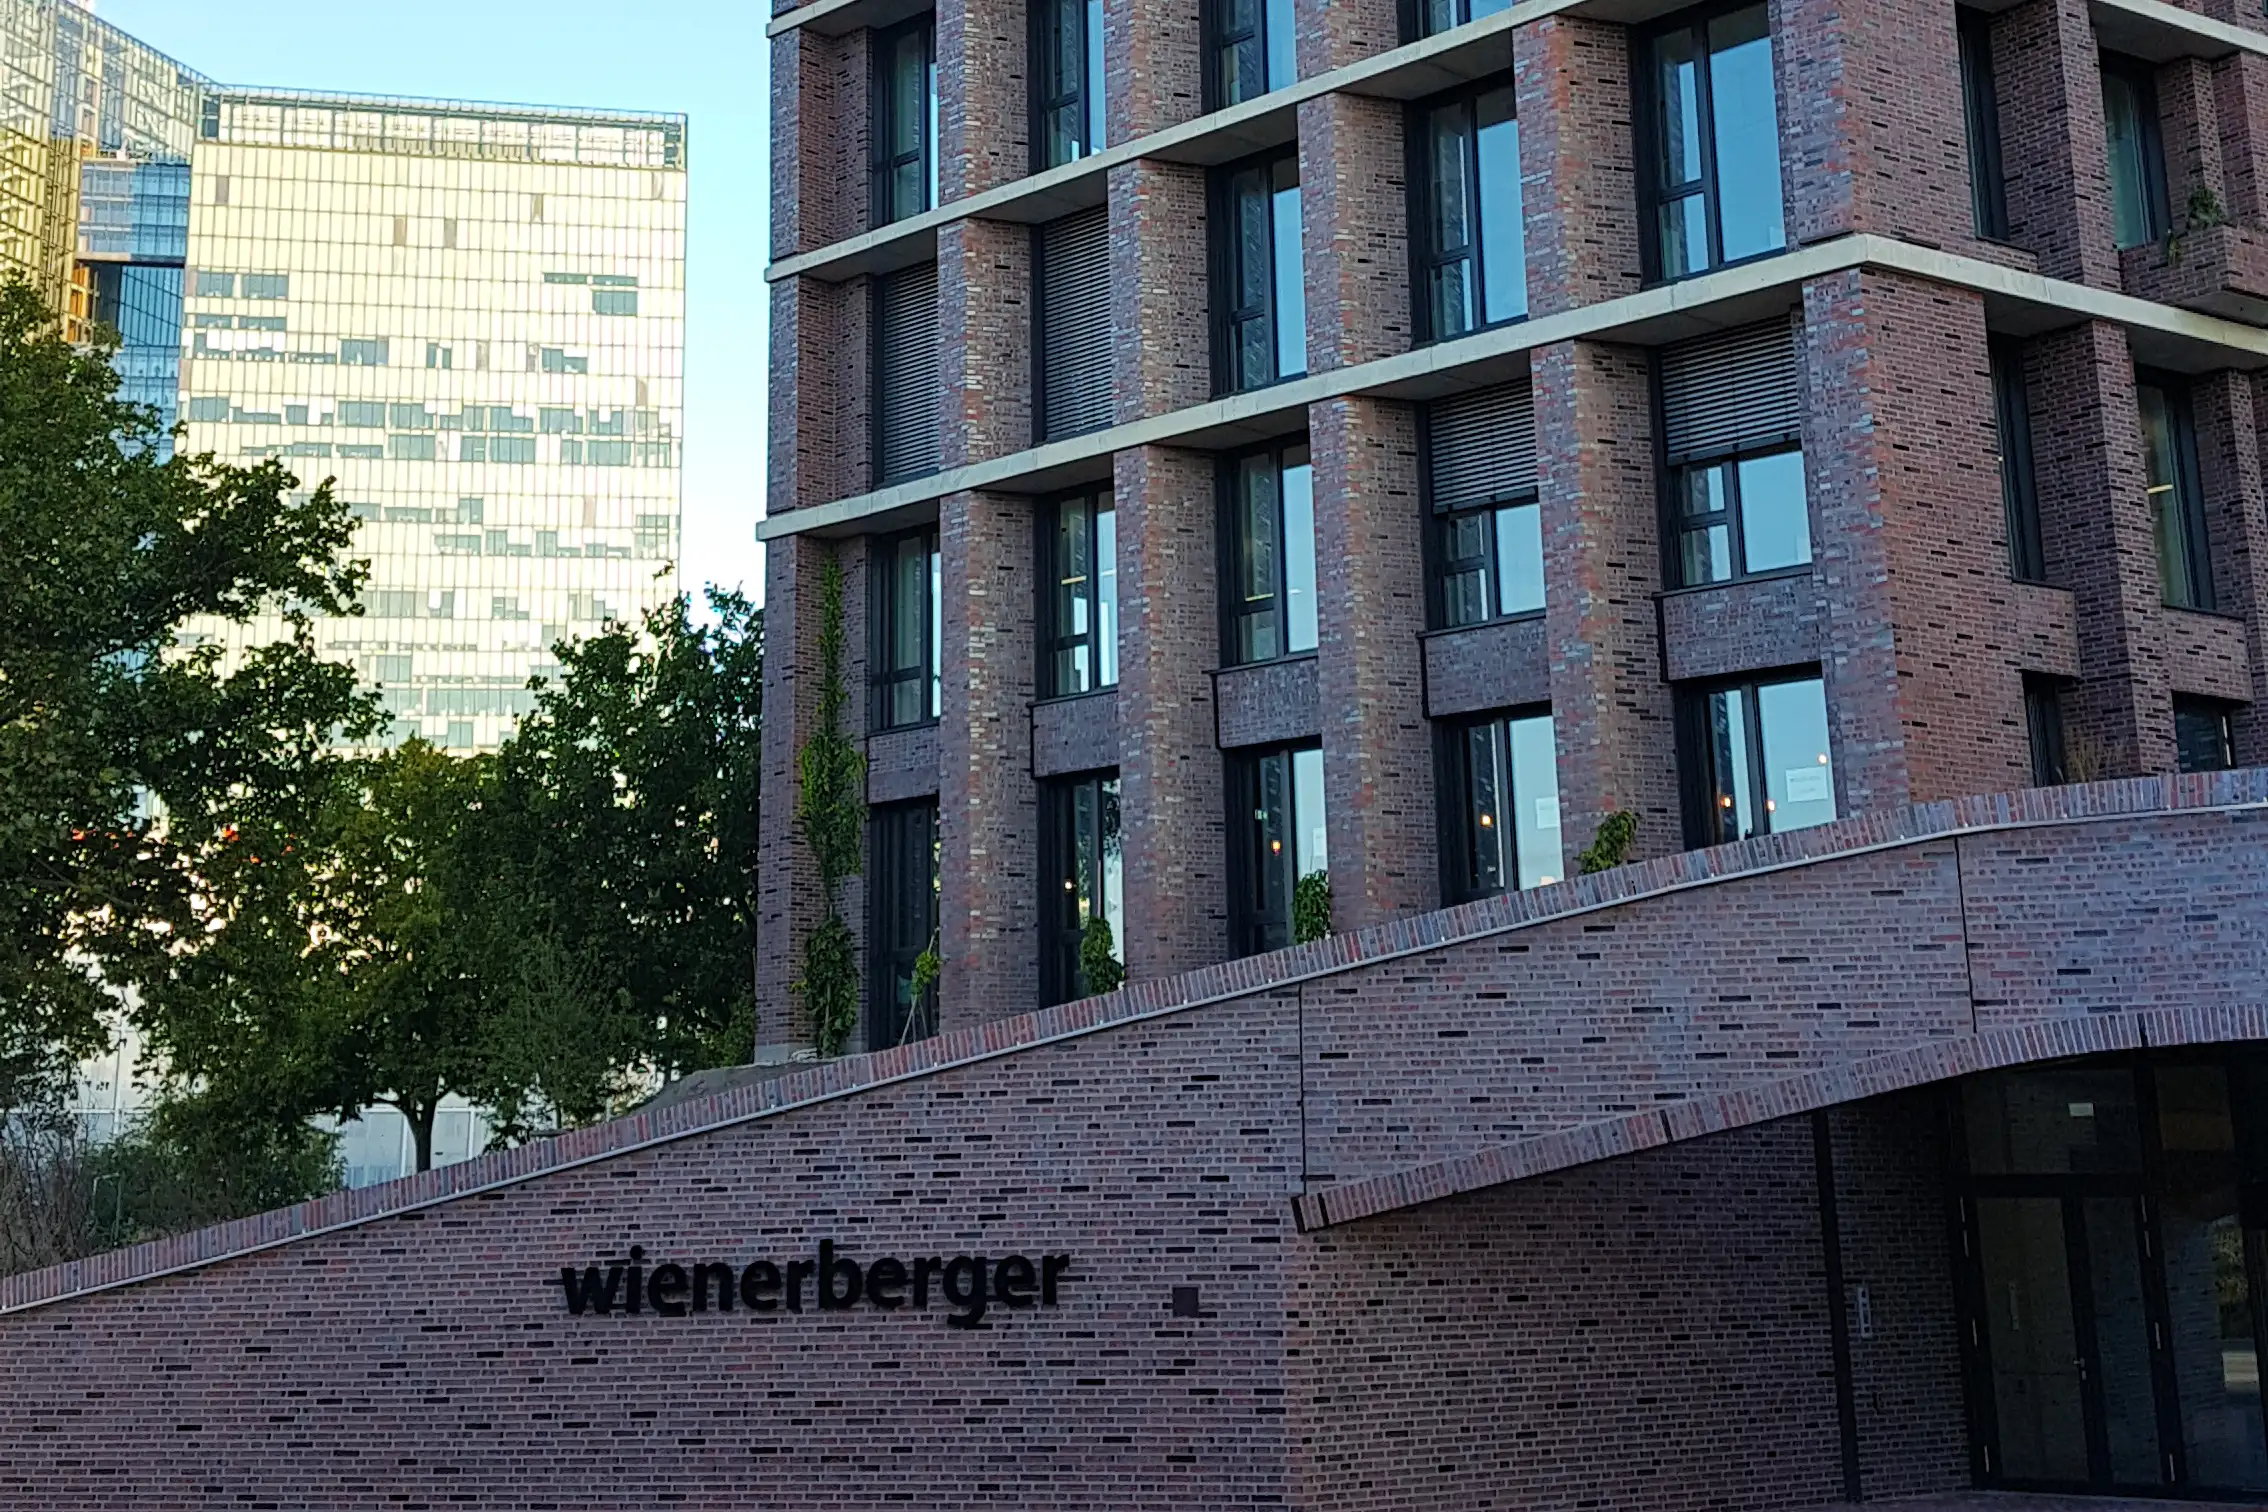 The Arivo parking solution in use at the Wienerberger headquarter